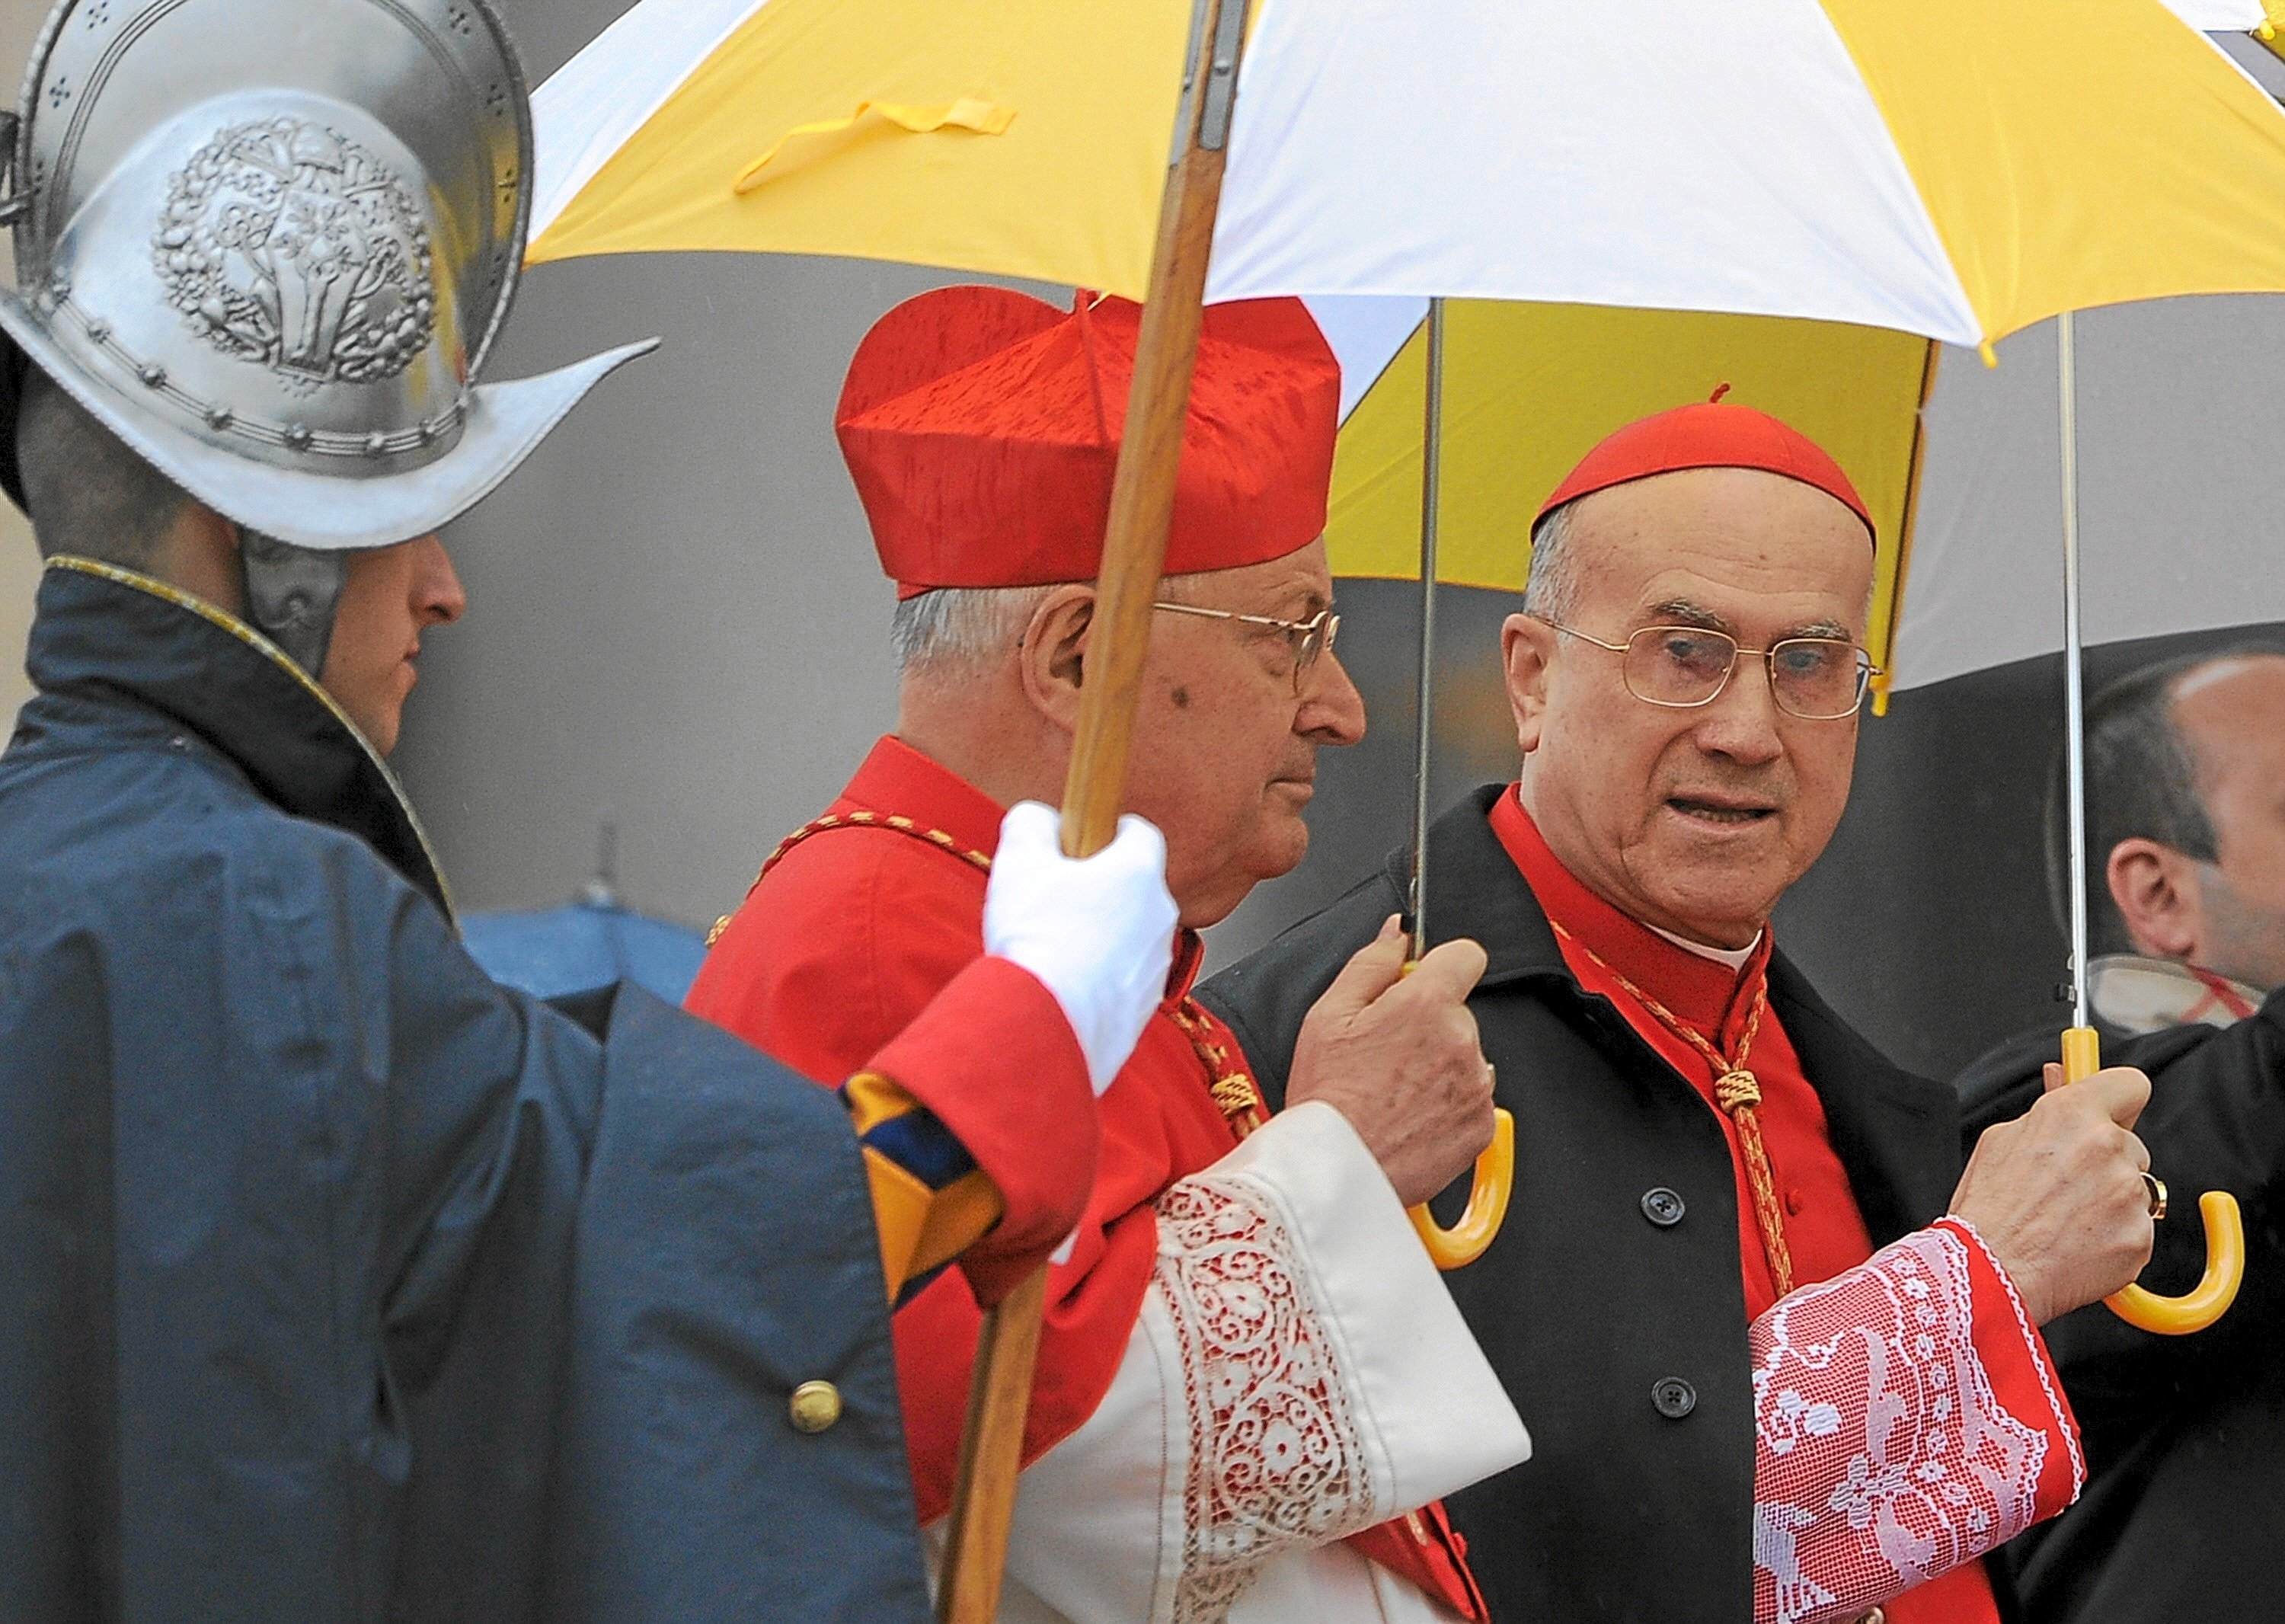 Angelo Sodano (left) and Tarcisio Bertone (right) in St. Peter's Square during Holy Week in 2010.